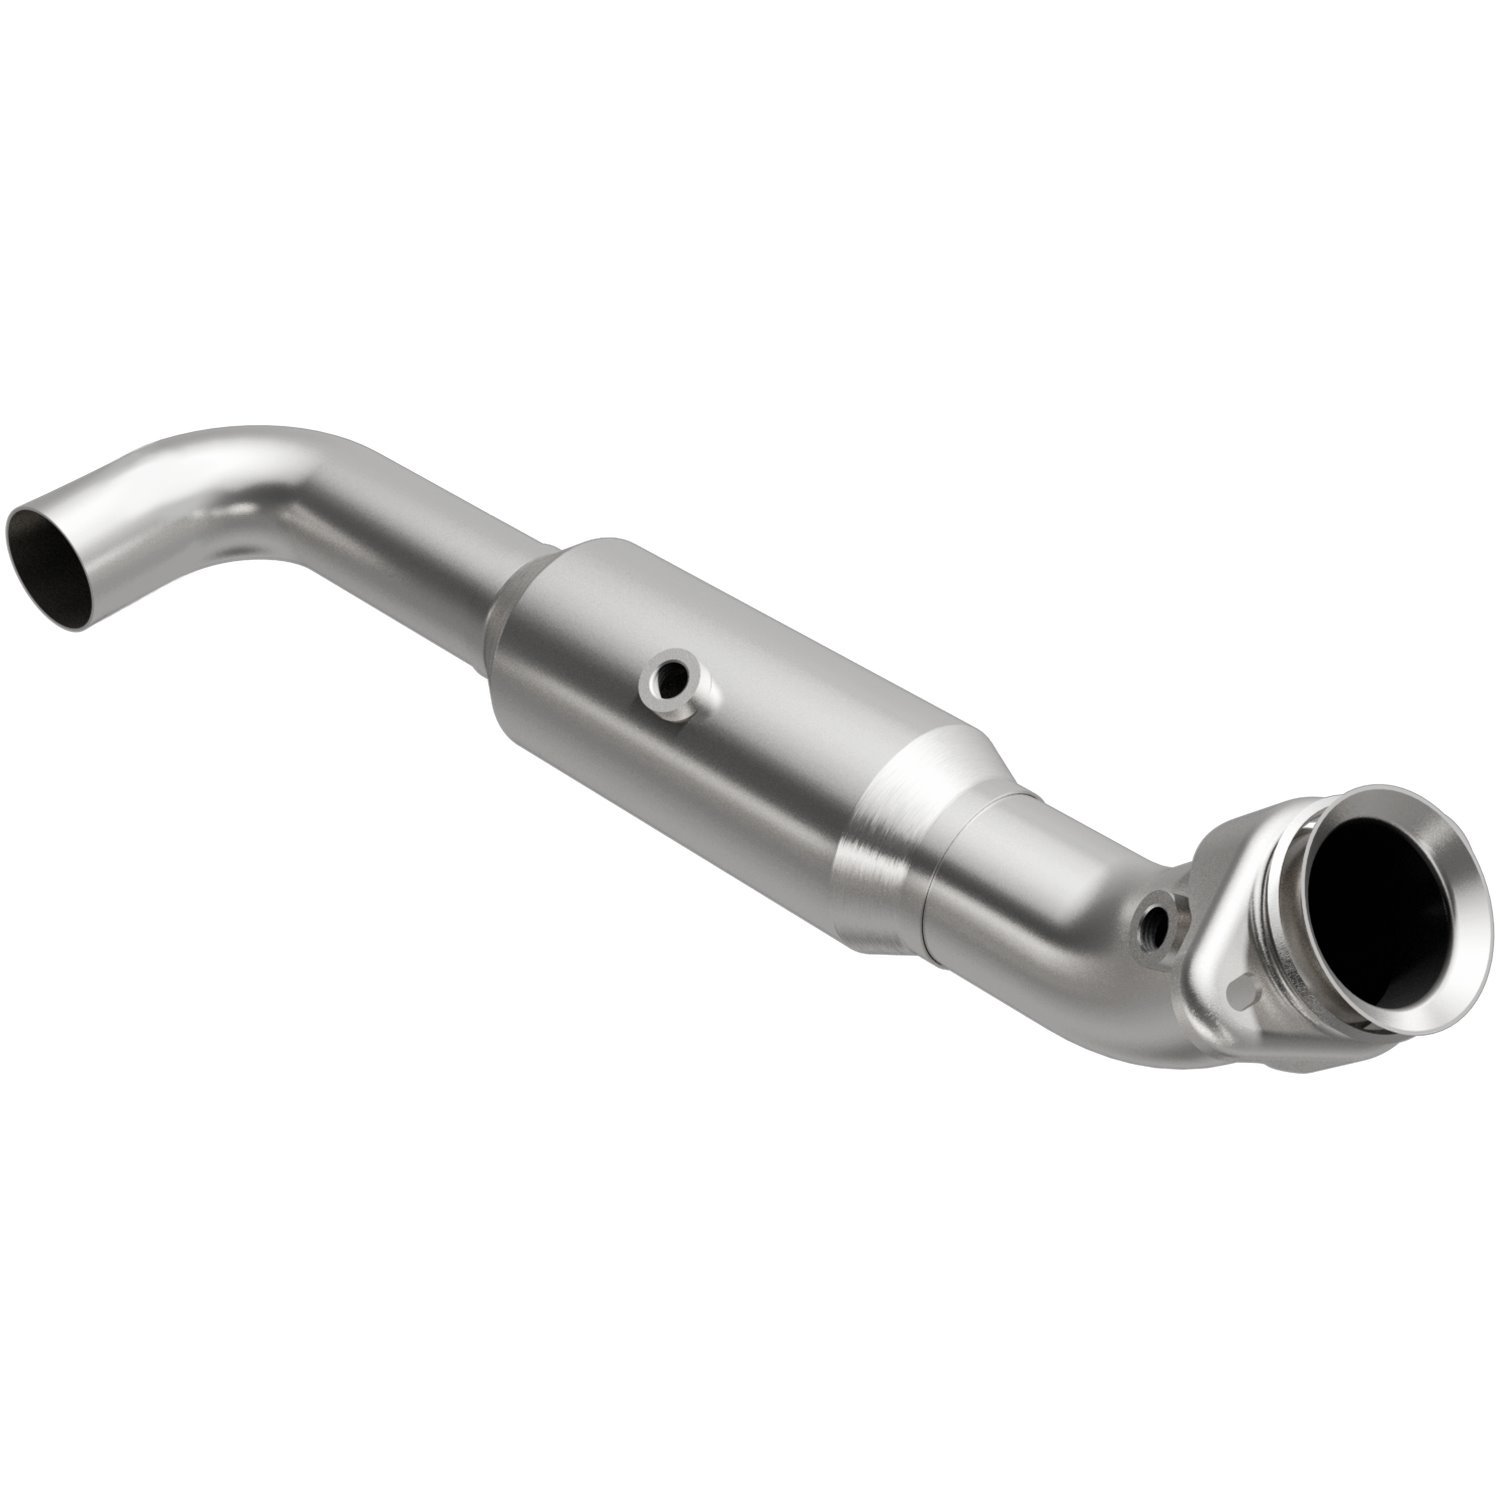 2010-2014 Ford F-150 OEM Grade Federal / EPA Compliant Direct-Fit Catalytic Converter